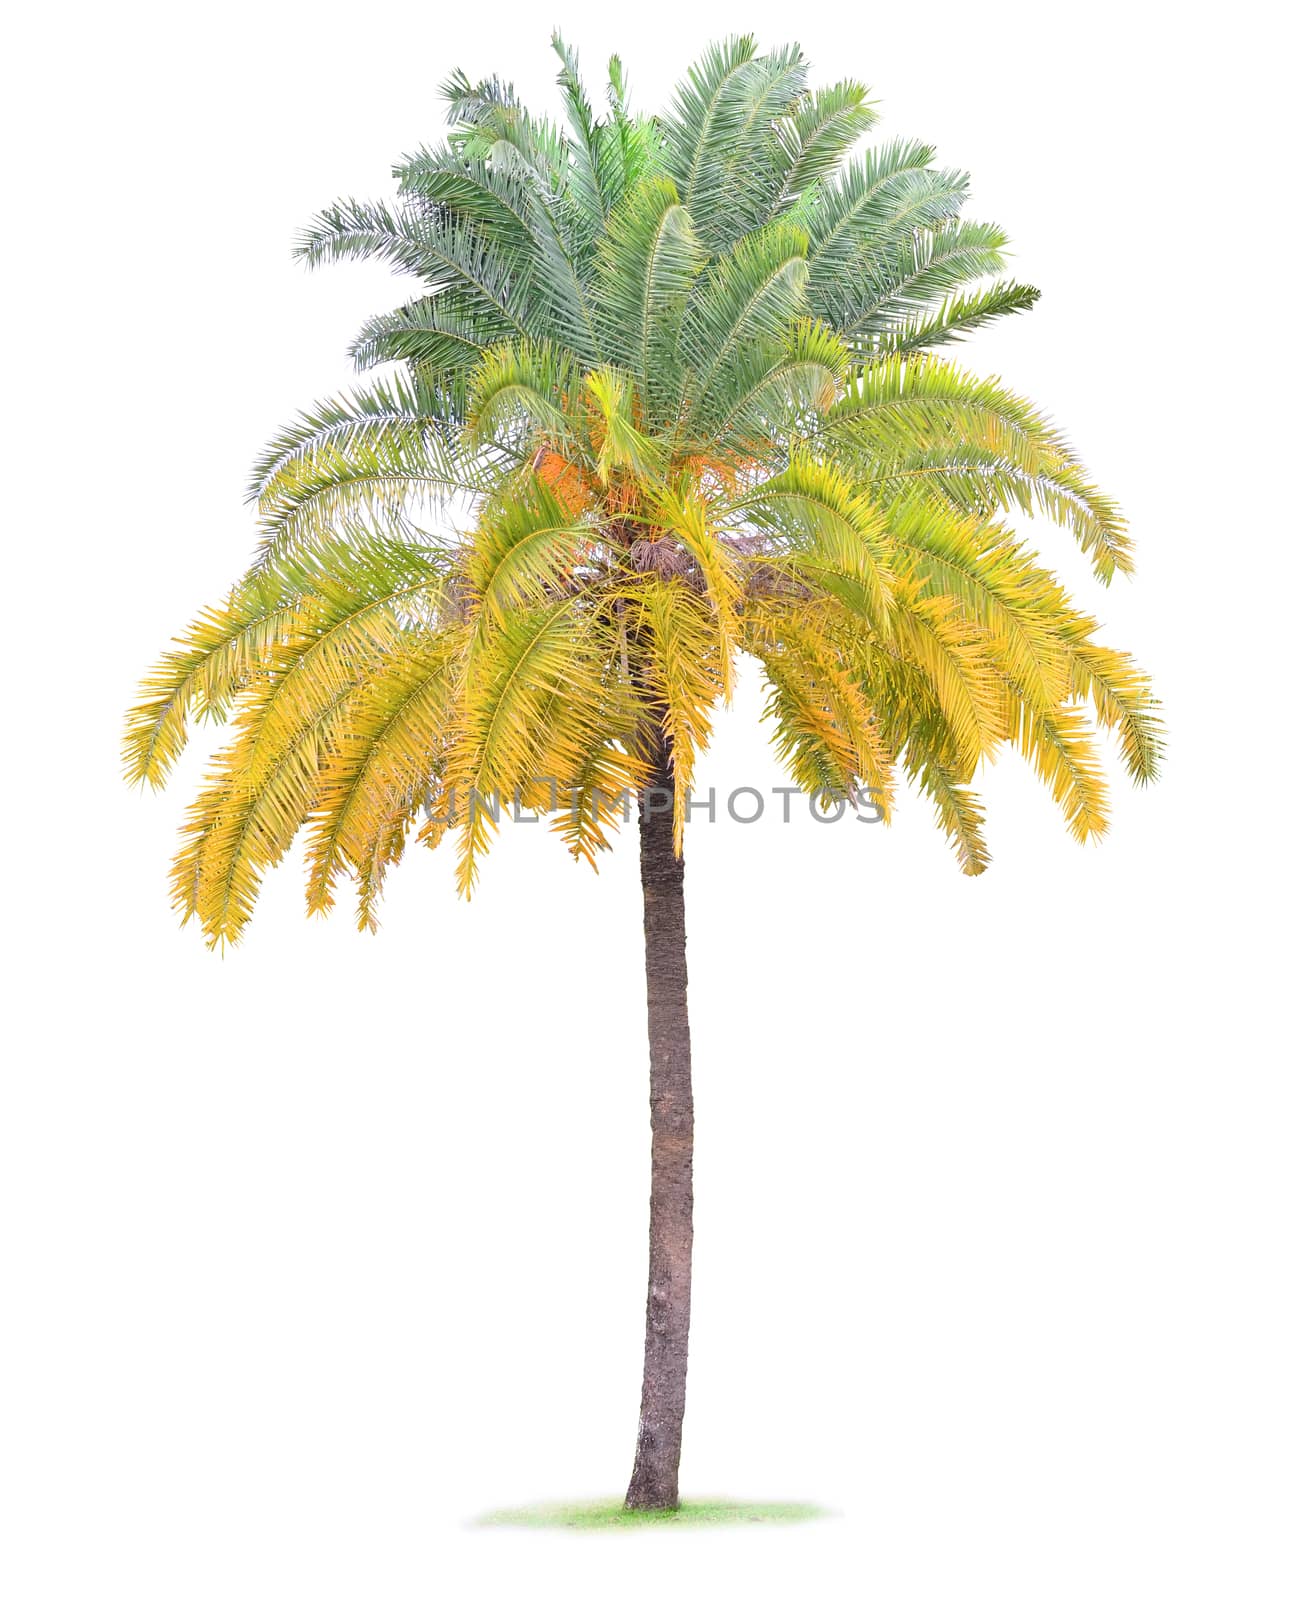 Coconut palm tree leaf on white background by phochi